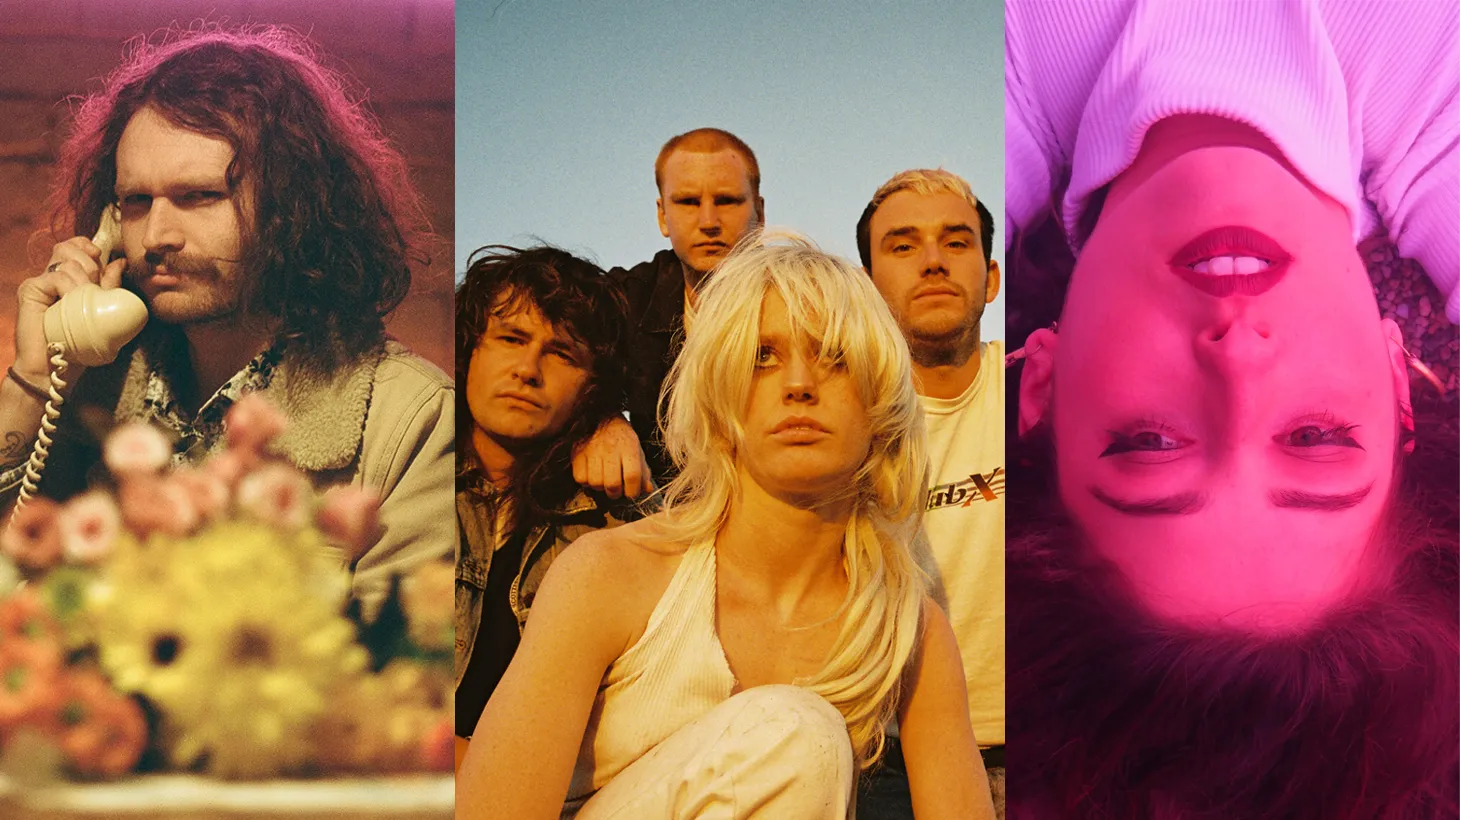 The Florets, Amyl and the Sniffers and Gabriella Cohen.